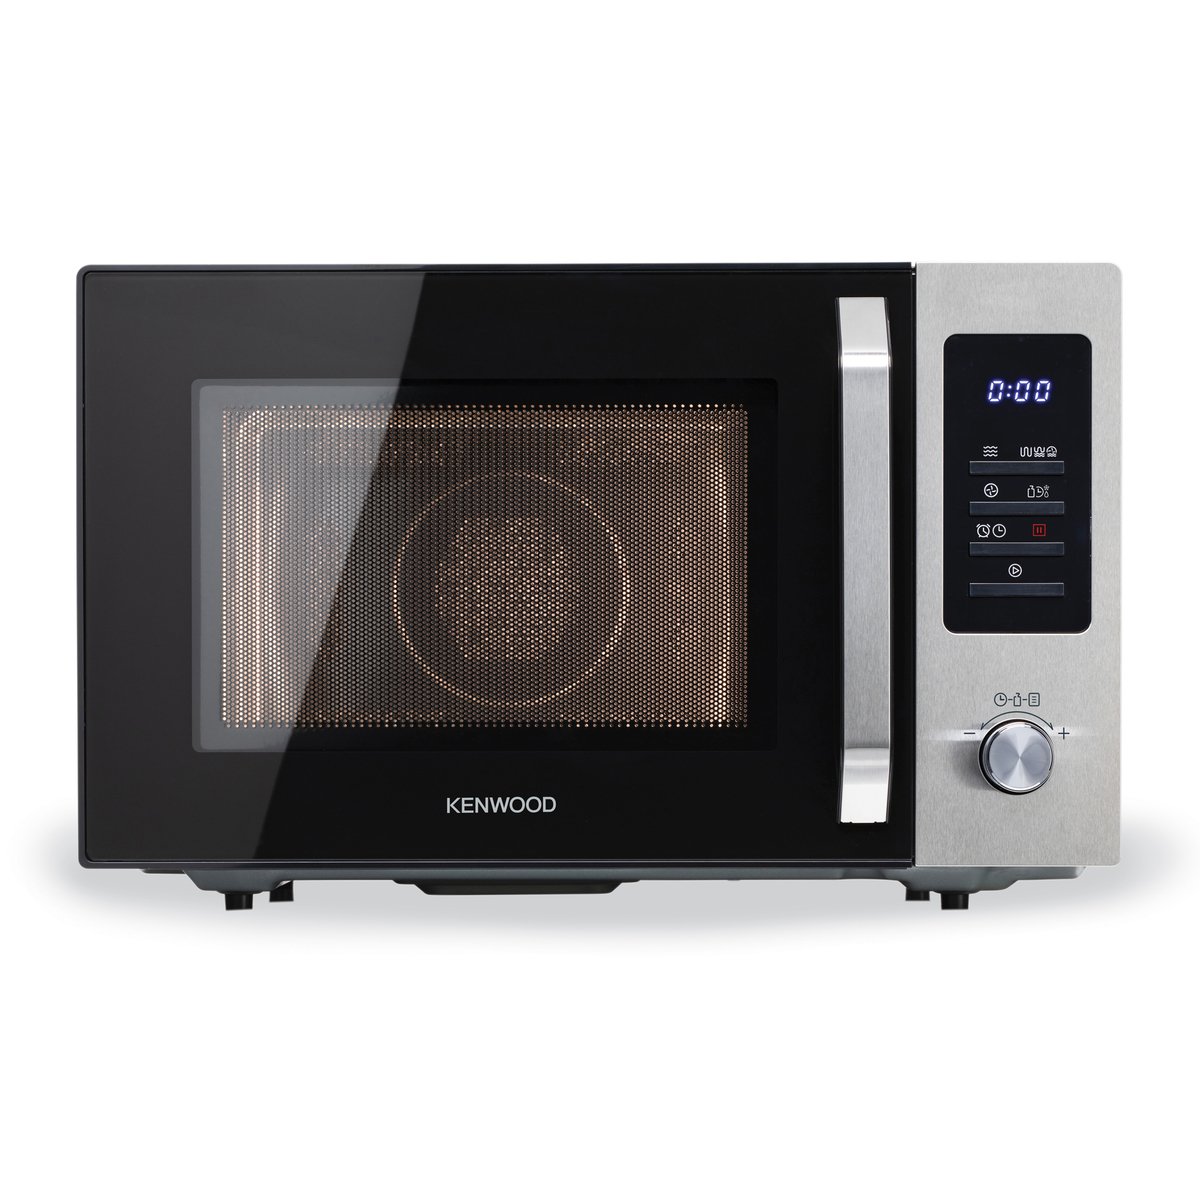 Buy Kenwood Microwave Oven with Grill Convention MWM31.000BK 30LTR Online at Best Price | Microwave Ovens | Lulu UAE in UAE